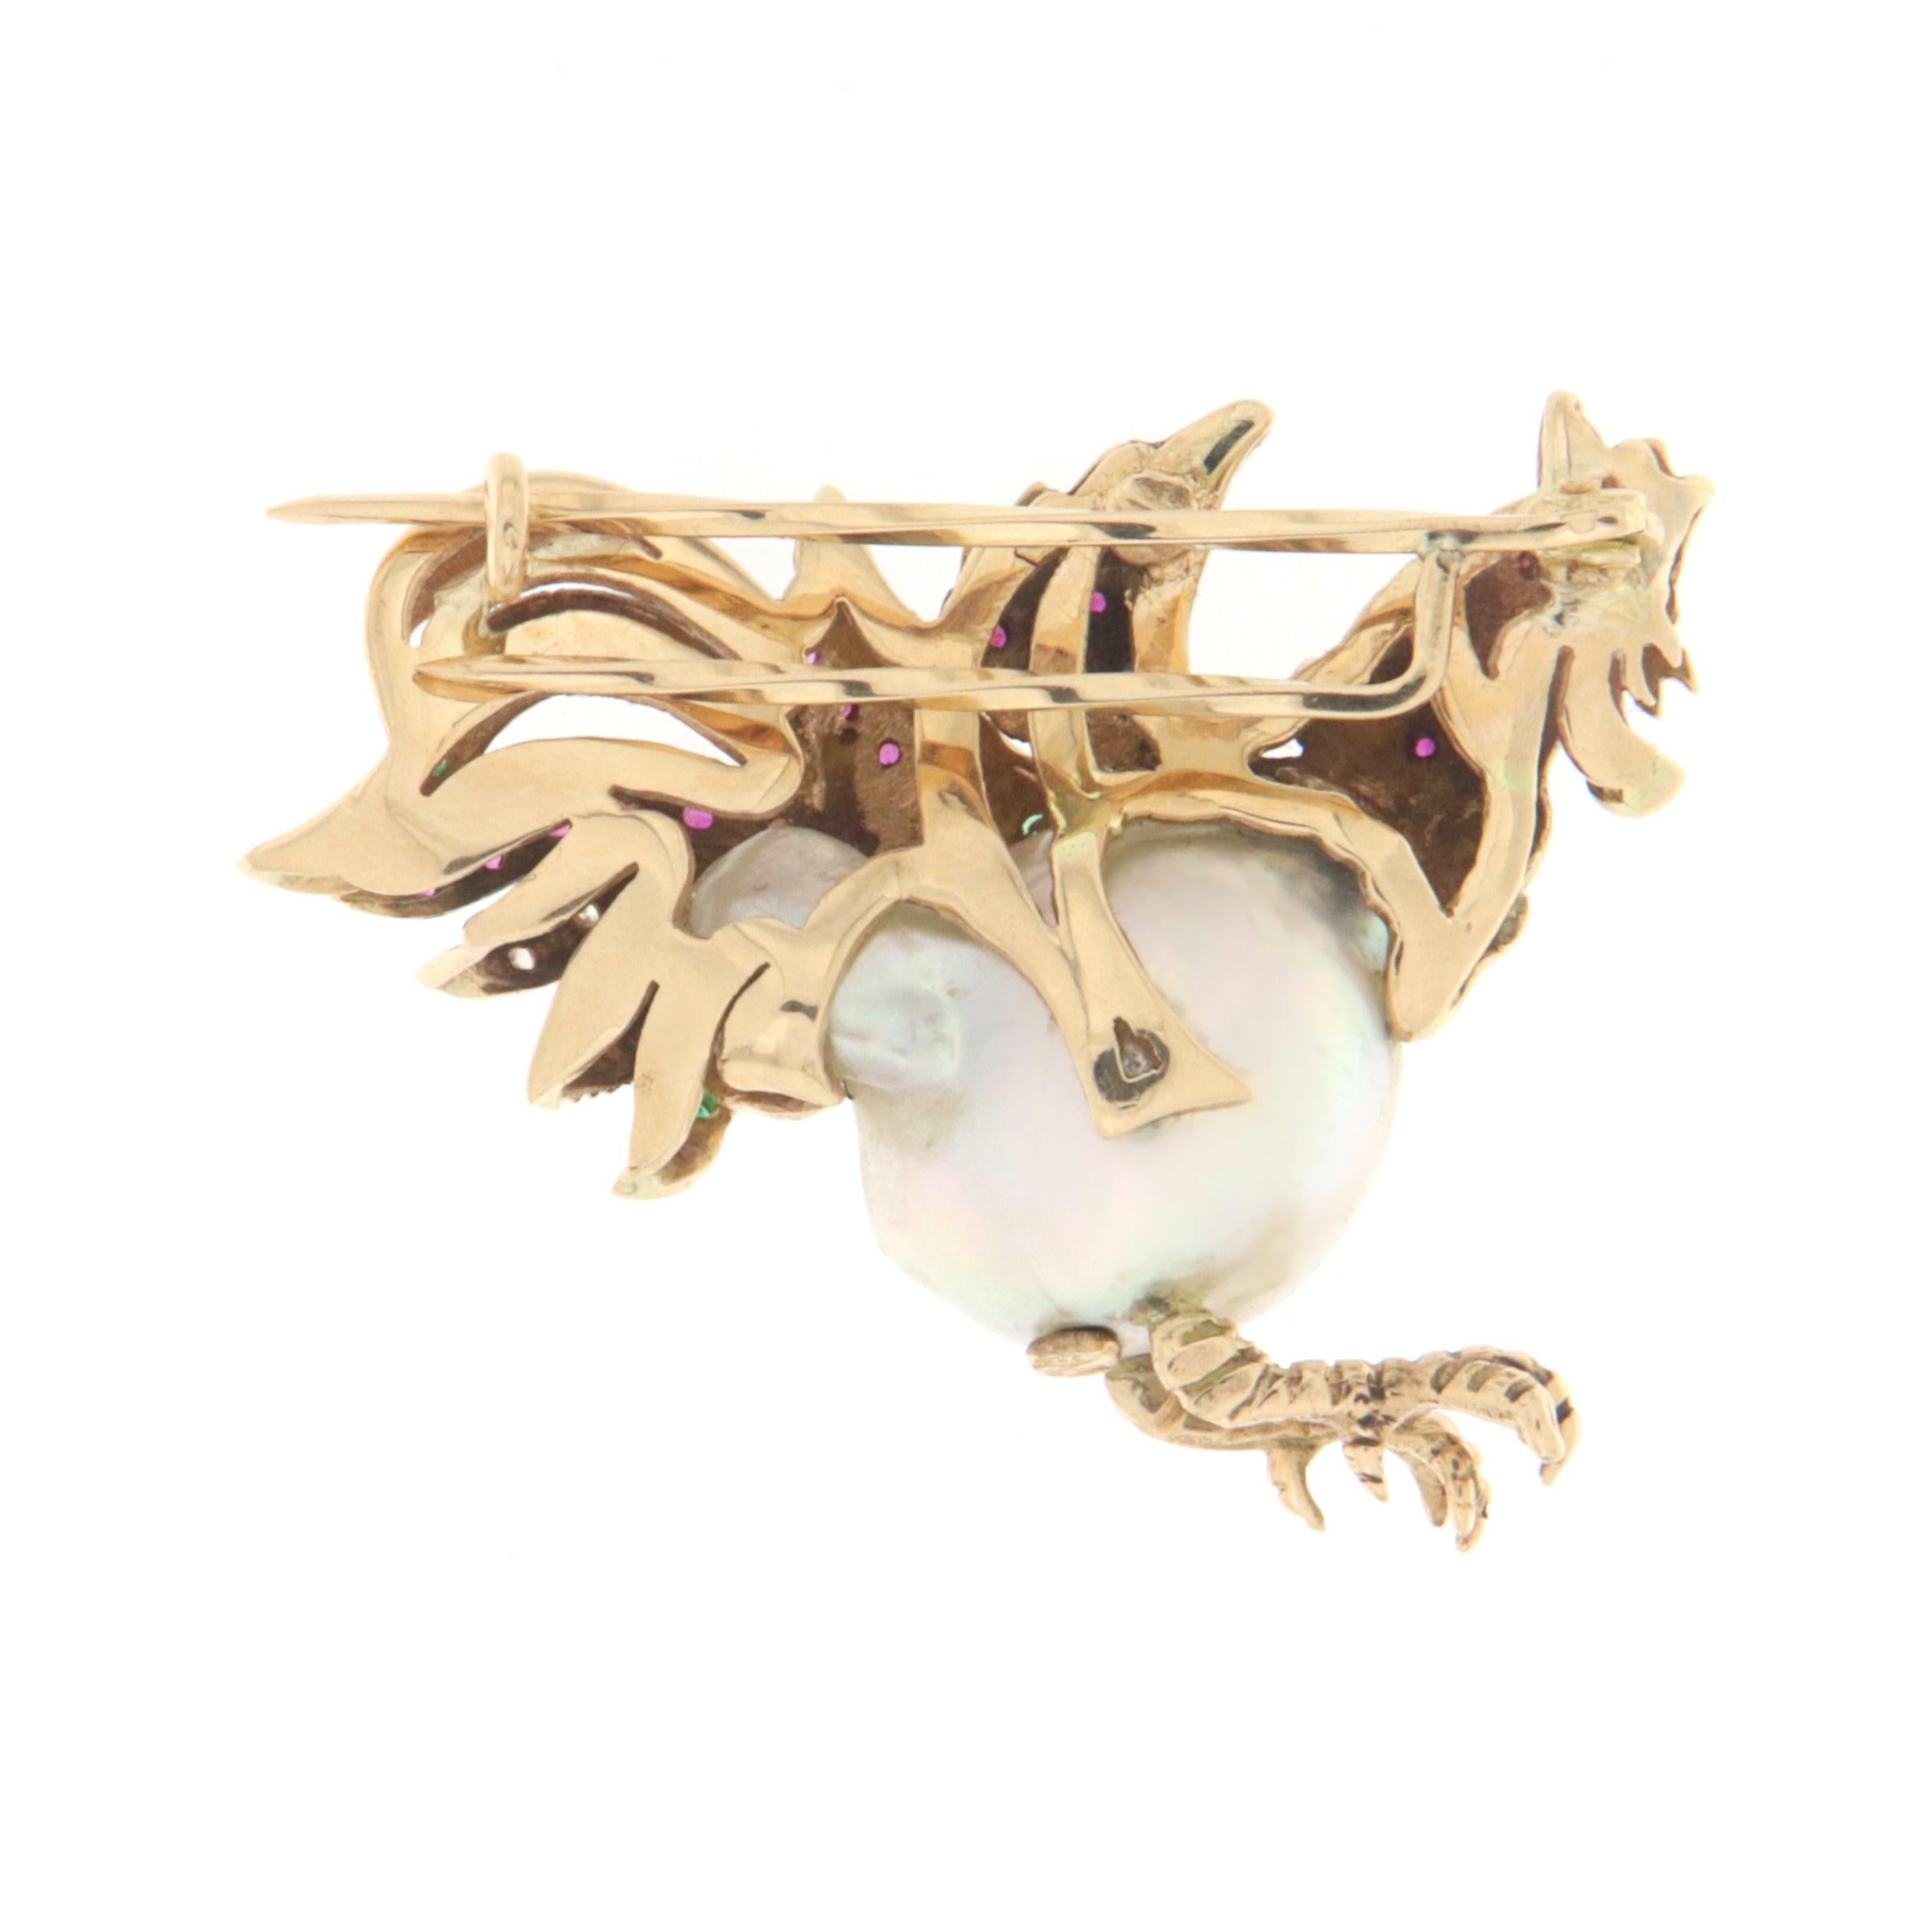 This exceptional brooch in 14-karat yellow gold celebrates the art of jewelry making with a design that captures the lively image of a rooster. Finished with skill and attention to detail, this brooch combines the warmth of yellow gold with the